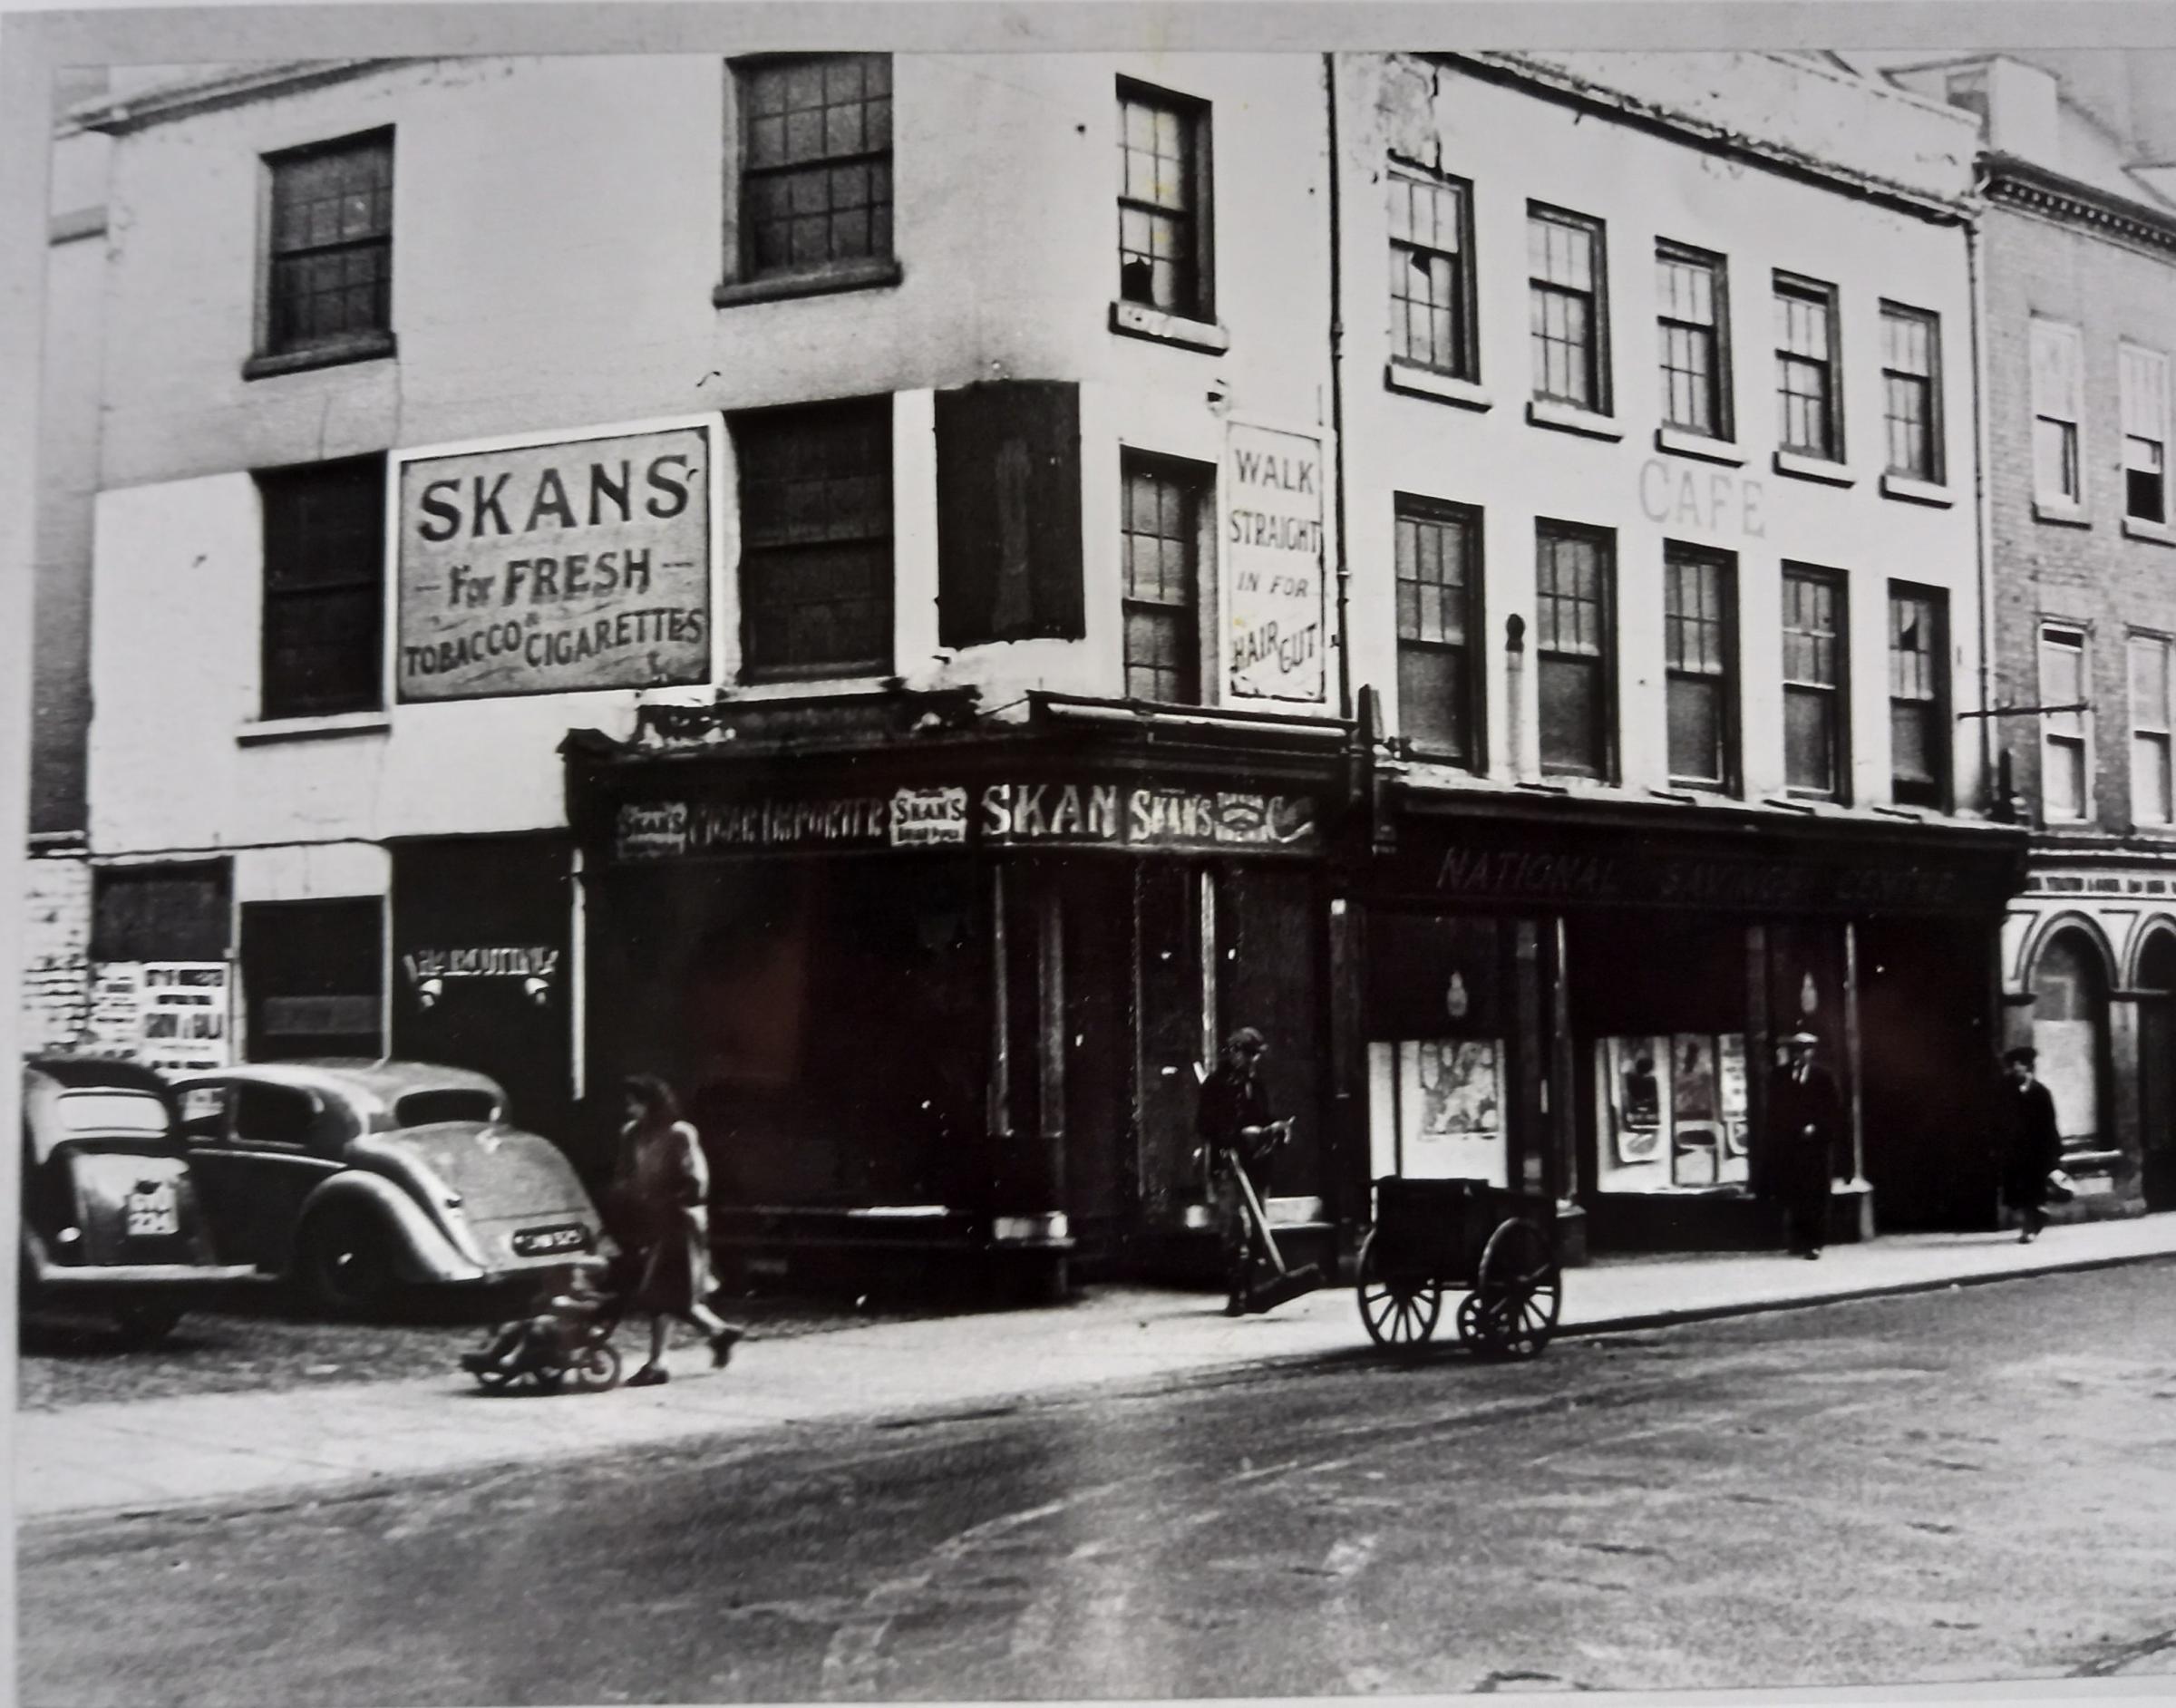 Skan’s original premises in Foregate Street, opposite the Star Hotel. The tobacconists and hairdressers then moved to the top of Broad Street to take over a former post office